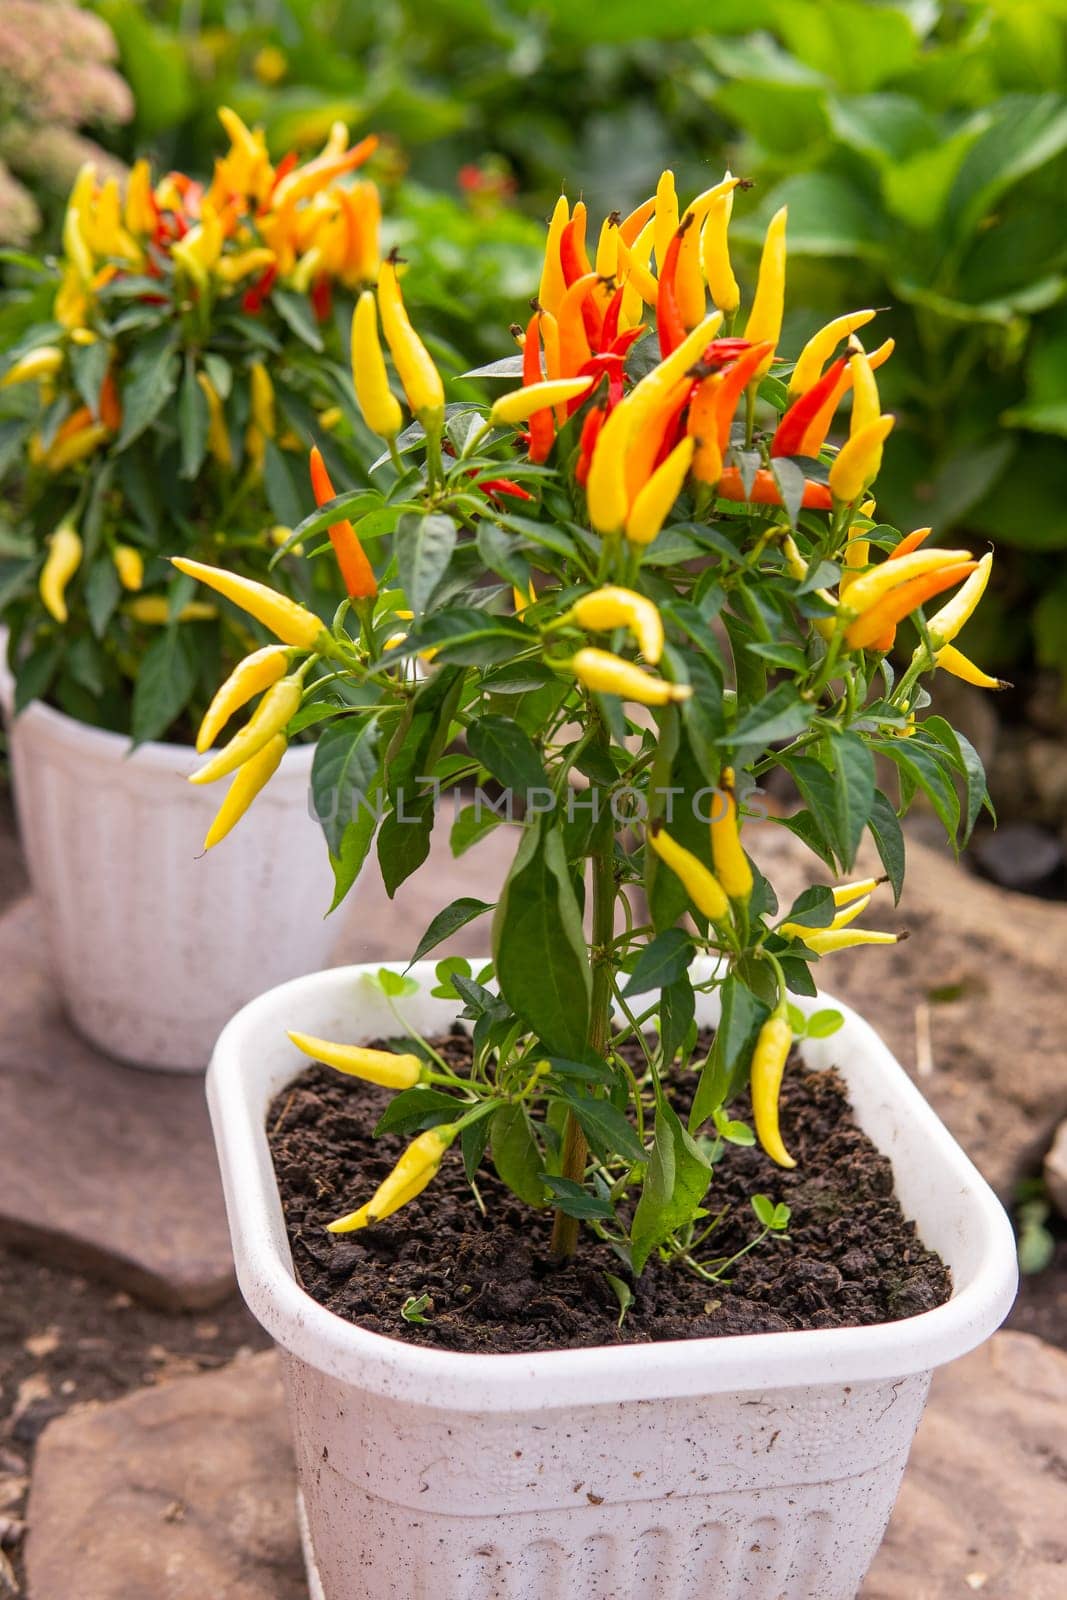 Growing pepper in a pot in the yard of a country house. Gardening and country life. by Annu1tochka